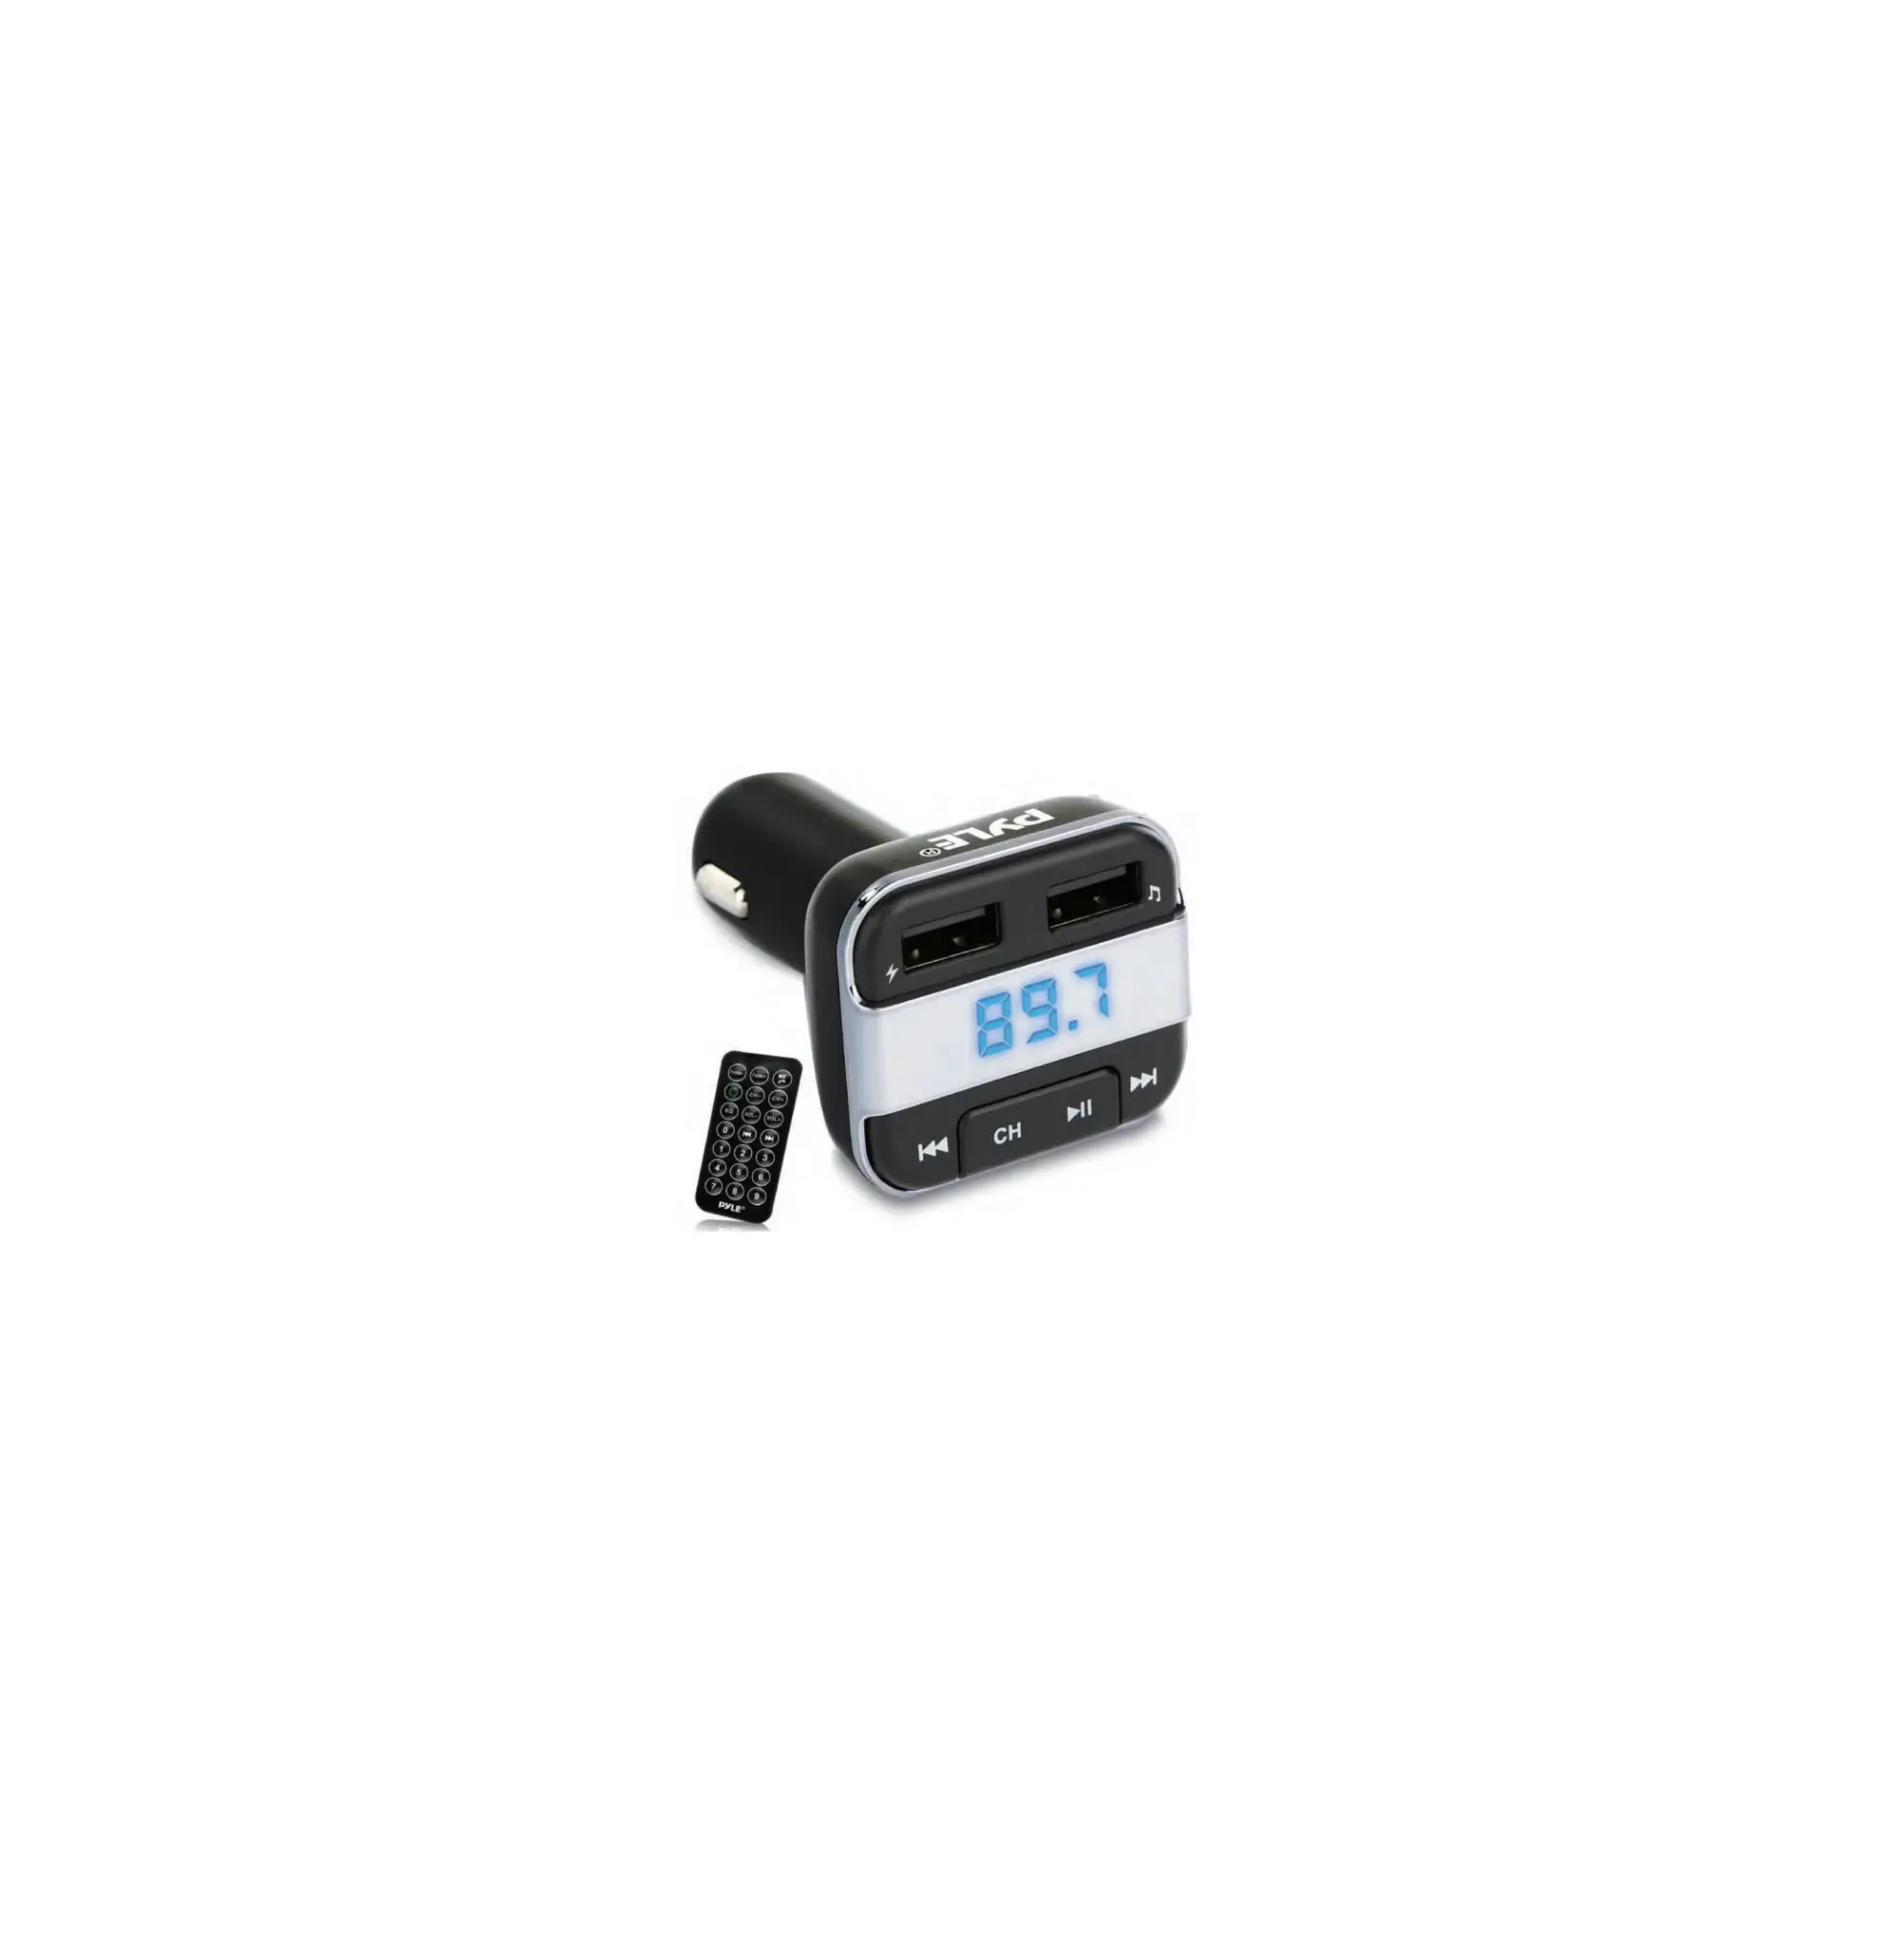 PBT90 3-in-1 Wireless BT Vehicle FM Transmitter Charger Kit